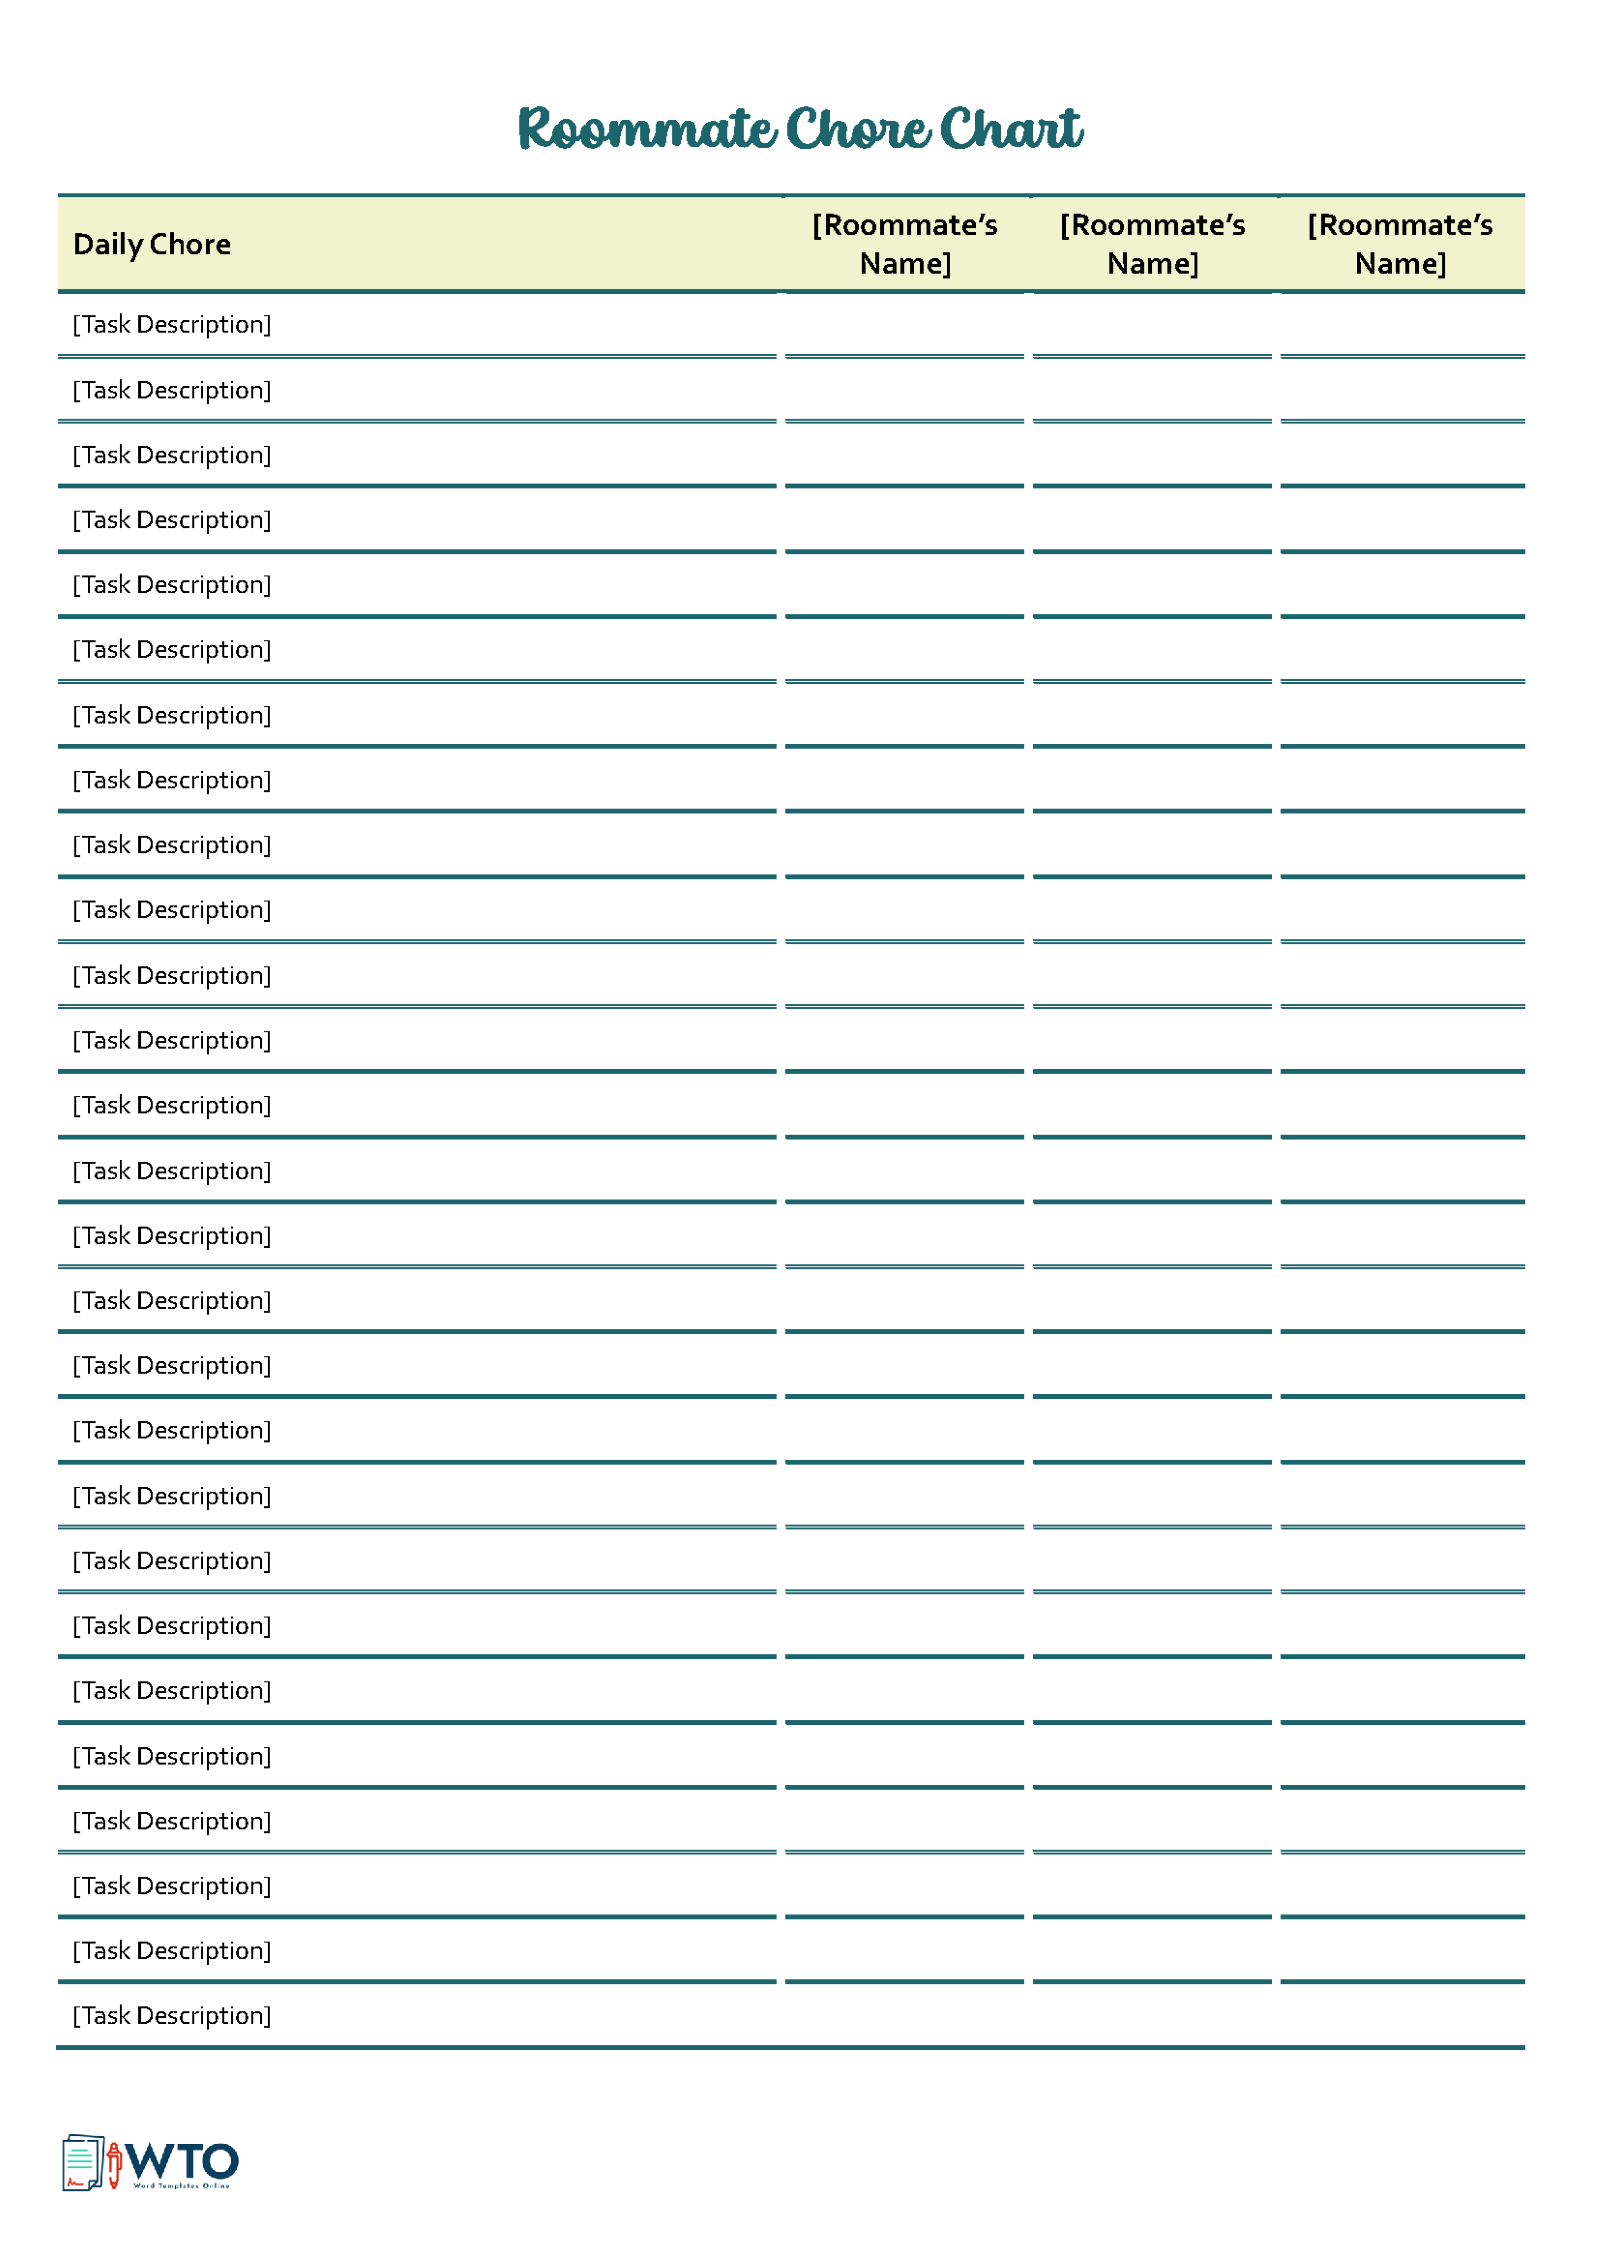 Sample Roommate Chore Chart: Collaborative Task Management